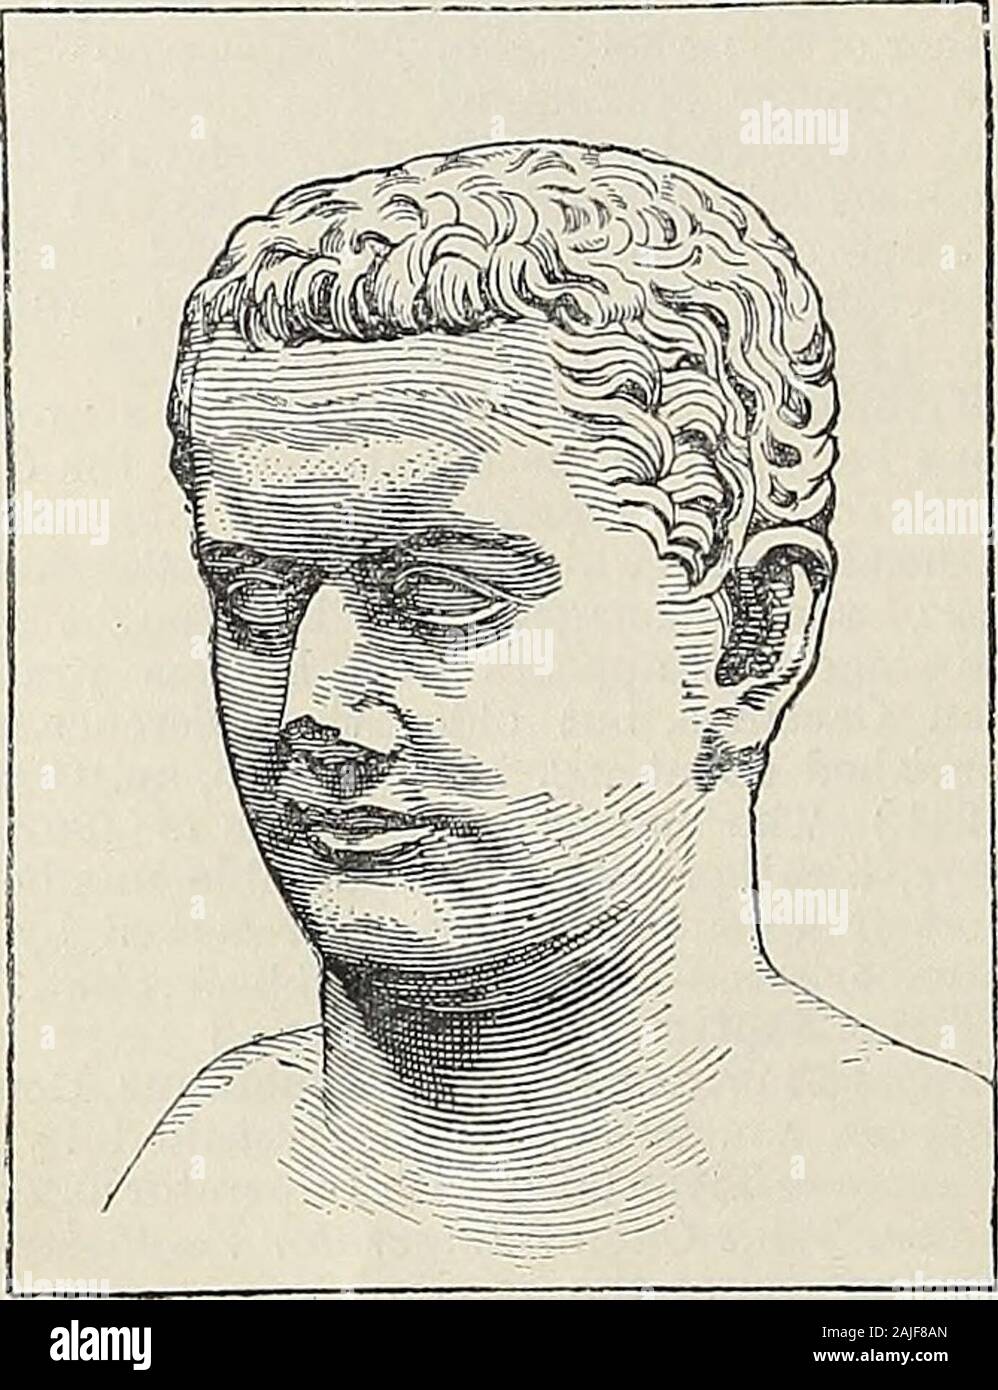 www.flickr.com/photos/internetarchivebookimages/tags/book... . o Cass. lxvi.15, 18). Titus succeeded his father in 79, andhis government proved an agreeable surpriseto those who had anticipated a return of thetimes of Nero. He was idolised by his army(Tac. Hist. v. 1), but he had a reputation forseverity, and even cruelty, and for licentious-ness, which made the Romans regard him asunpromising. But Titus exerted himself inevery way to win the affection of the people.He could control his passions, as he showed byhis dismissal of Berenice, and he gave proofsof clemency by pardoning his brother, Stock Photo